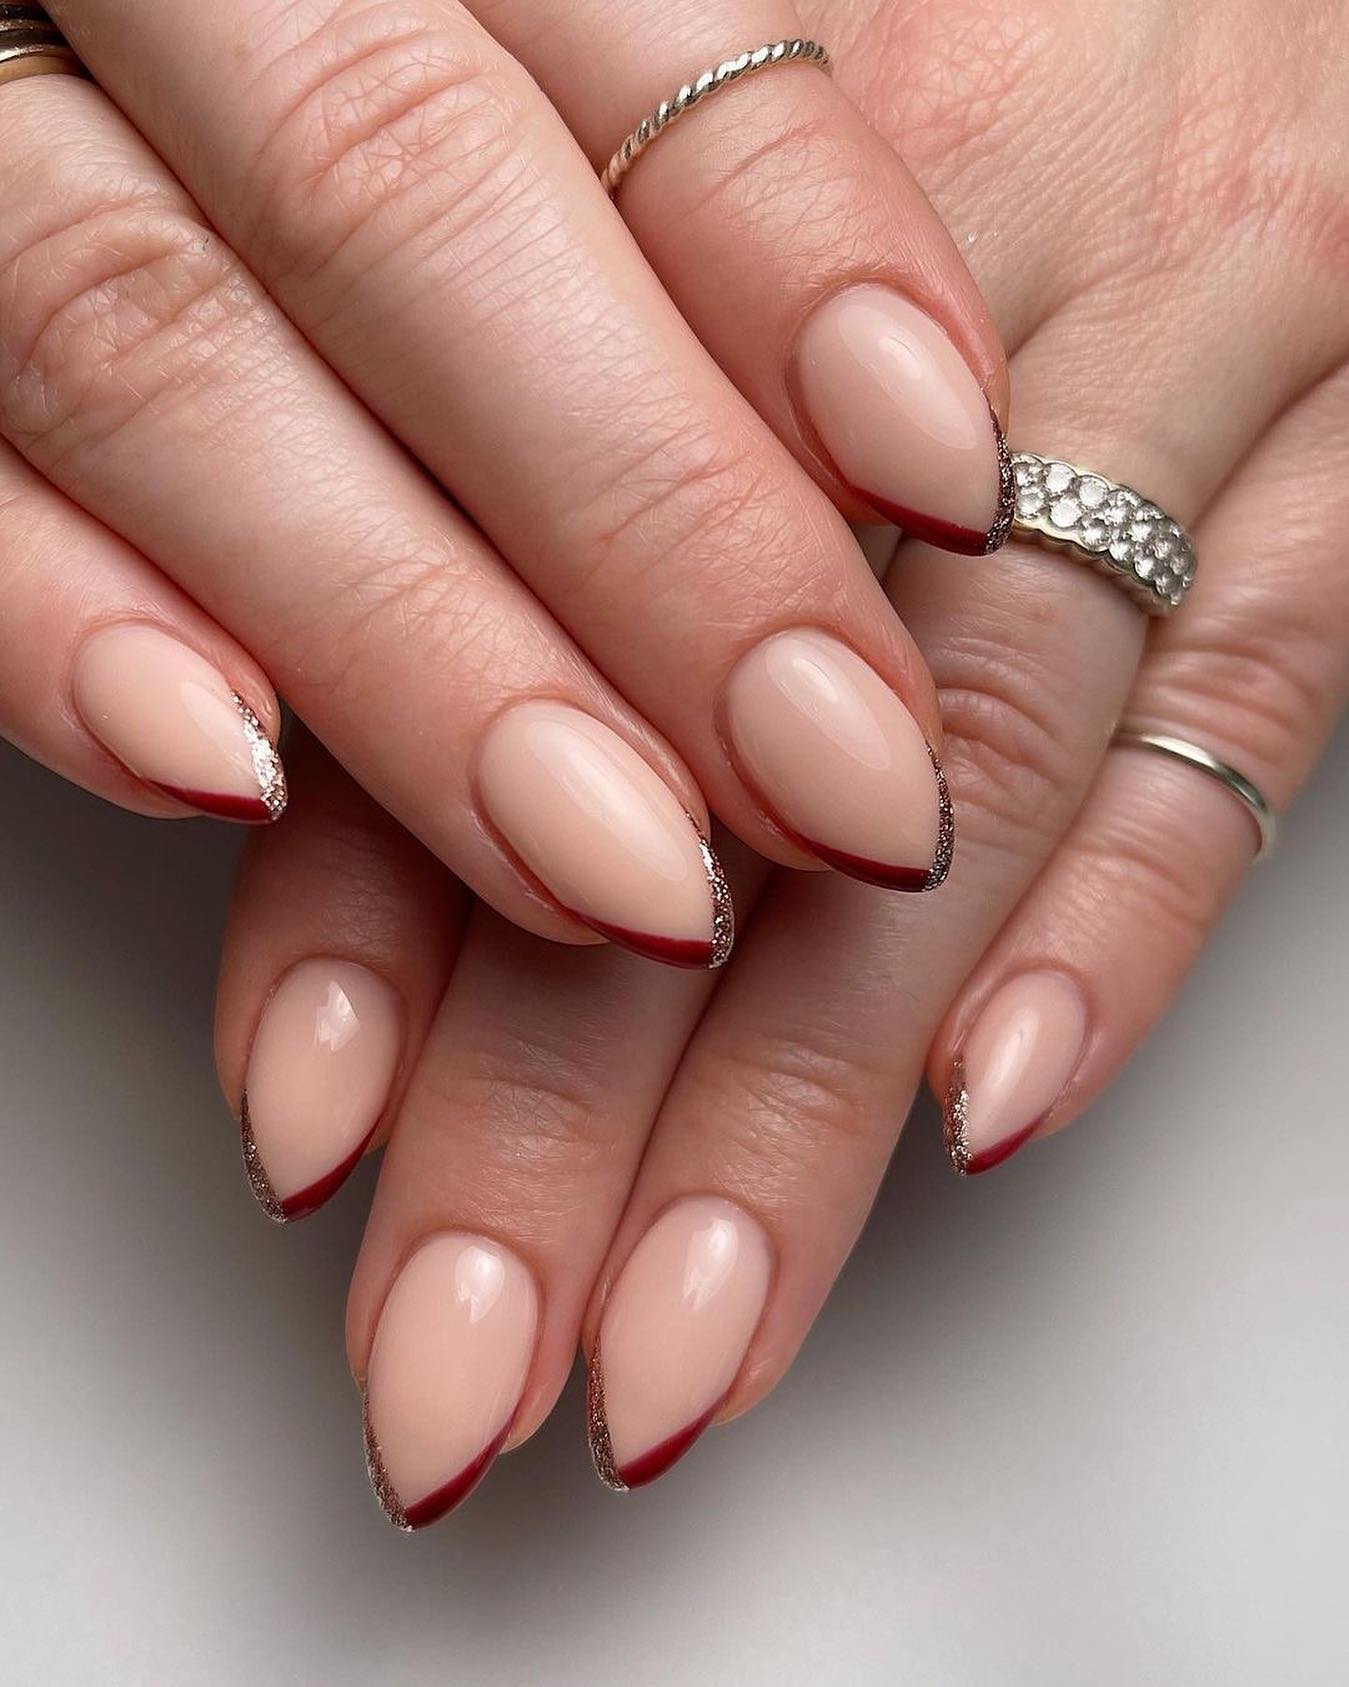 26 - Picture of French Tip Nails